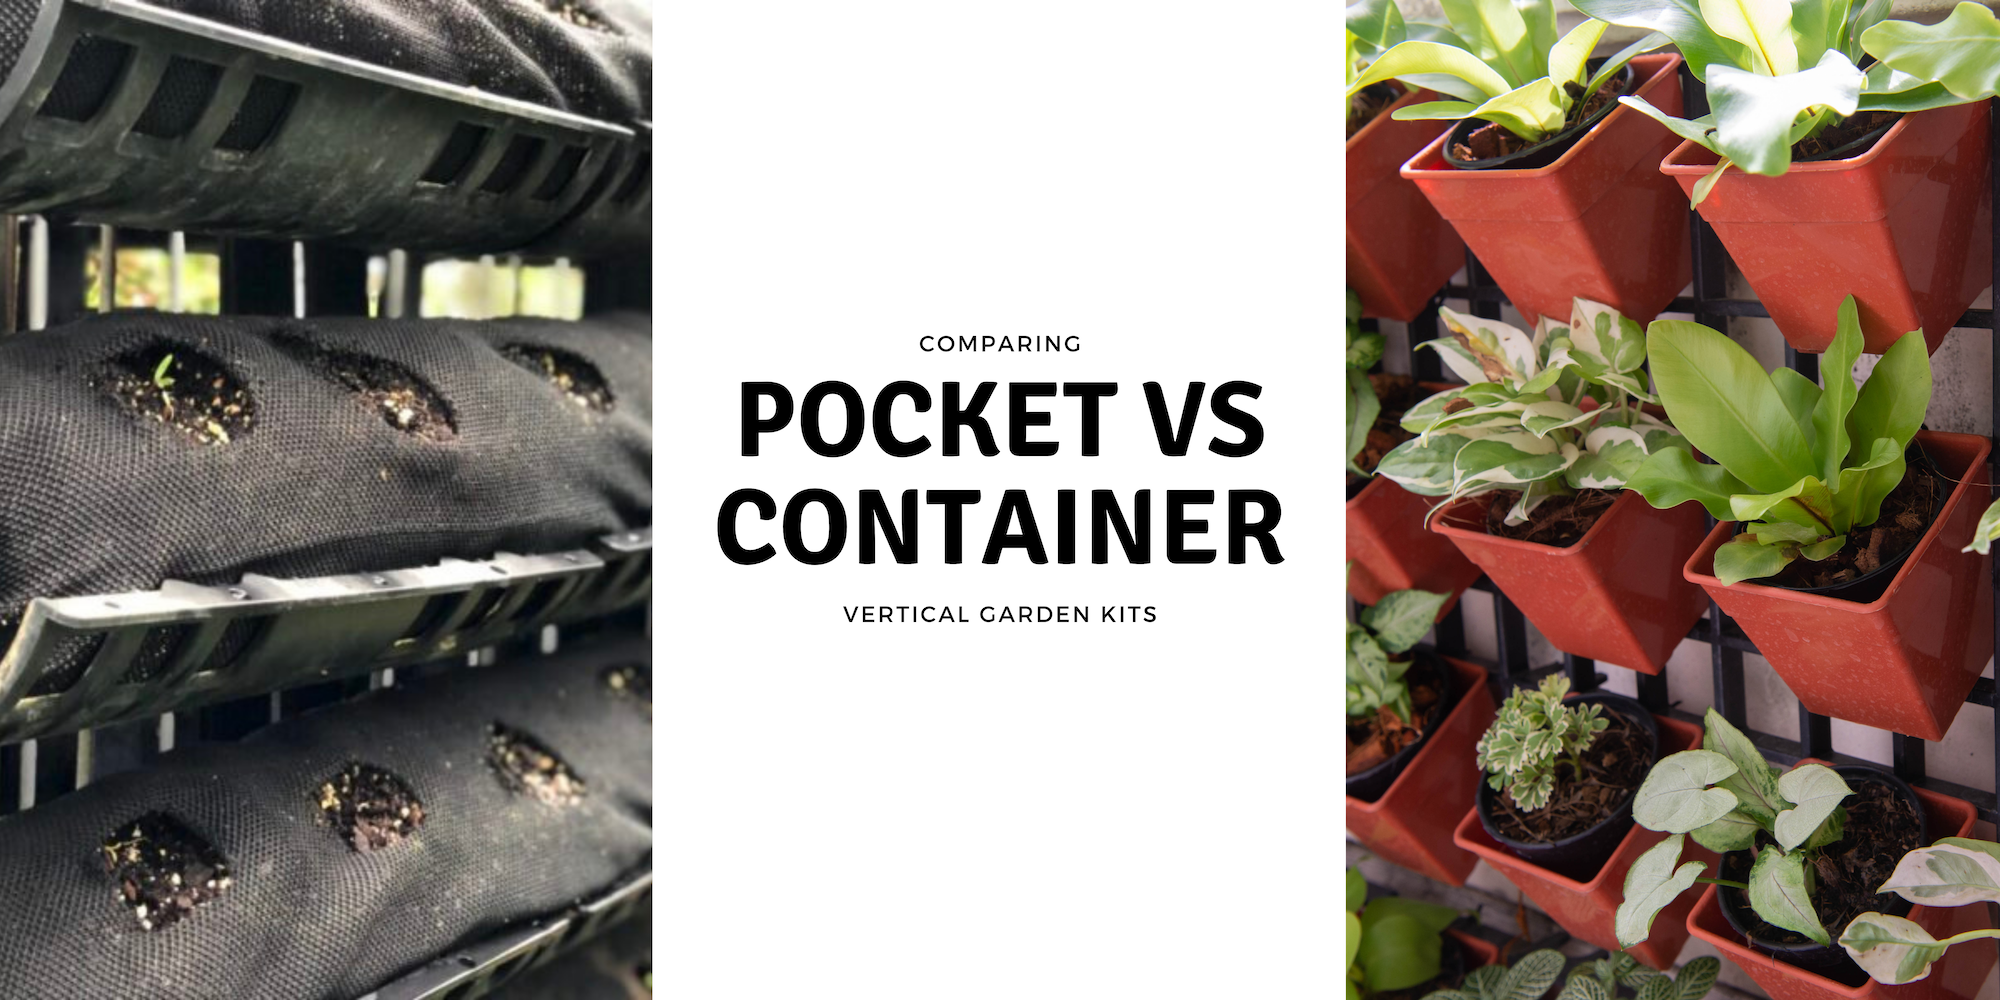 Comparing pocket vs container vertical garden kits